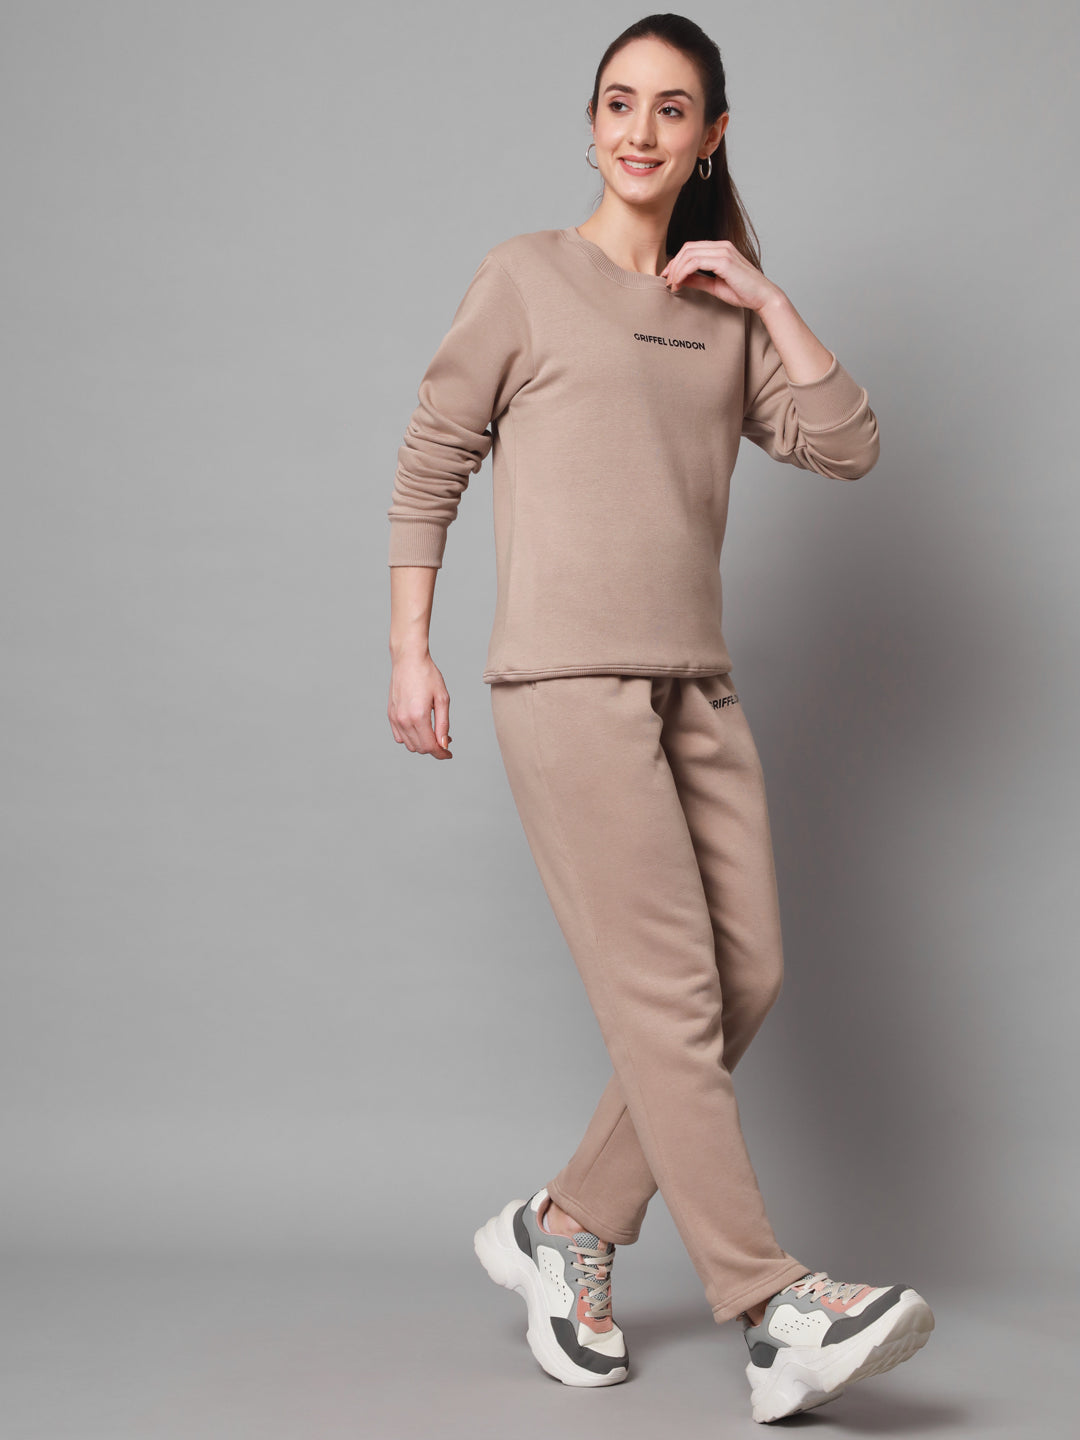 Griffel Women Solid Fleece Basic Round Neck Sweatshirt and Joggers Full set Camel Tracksuit - griffel